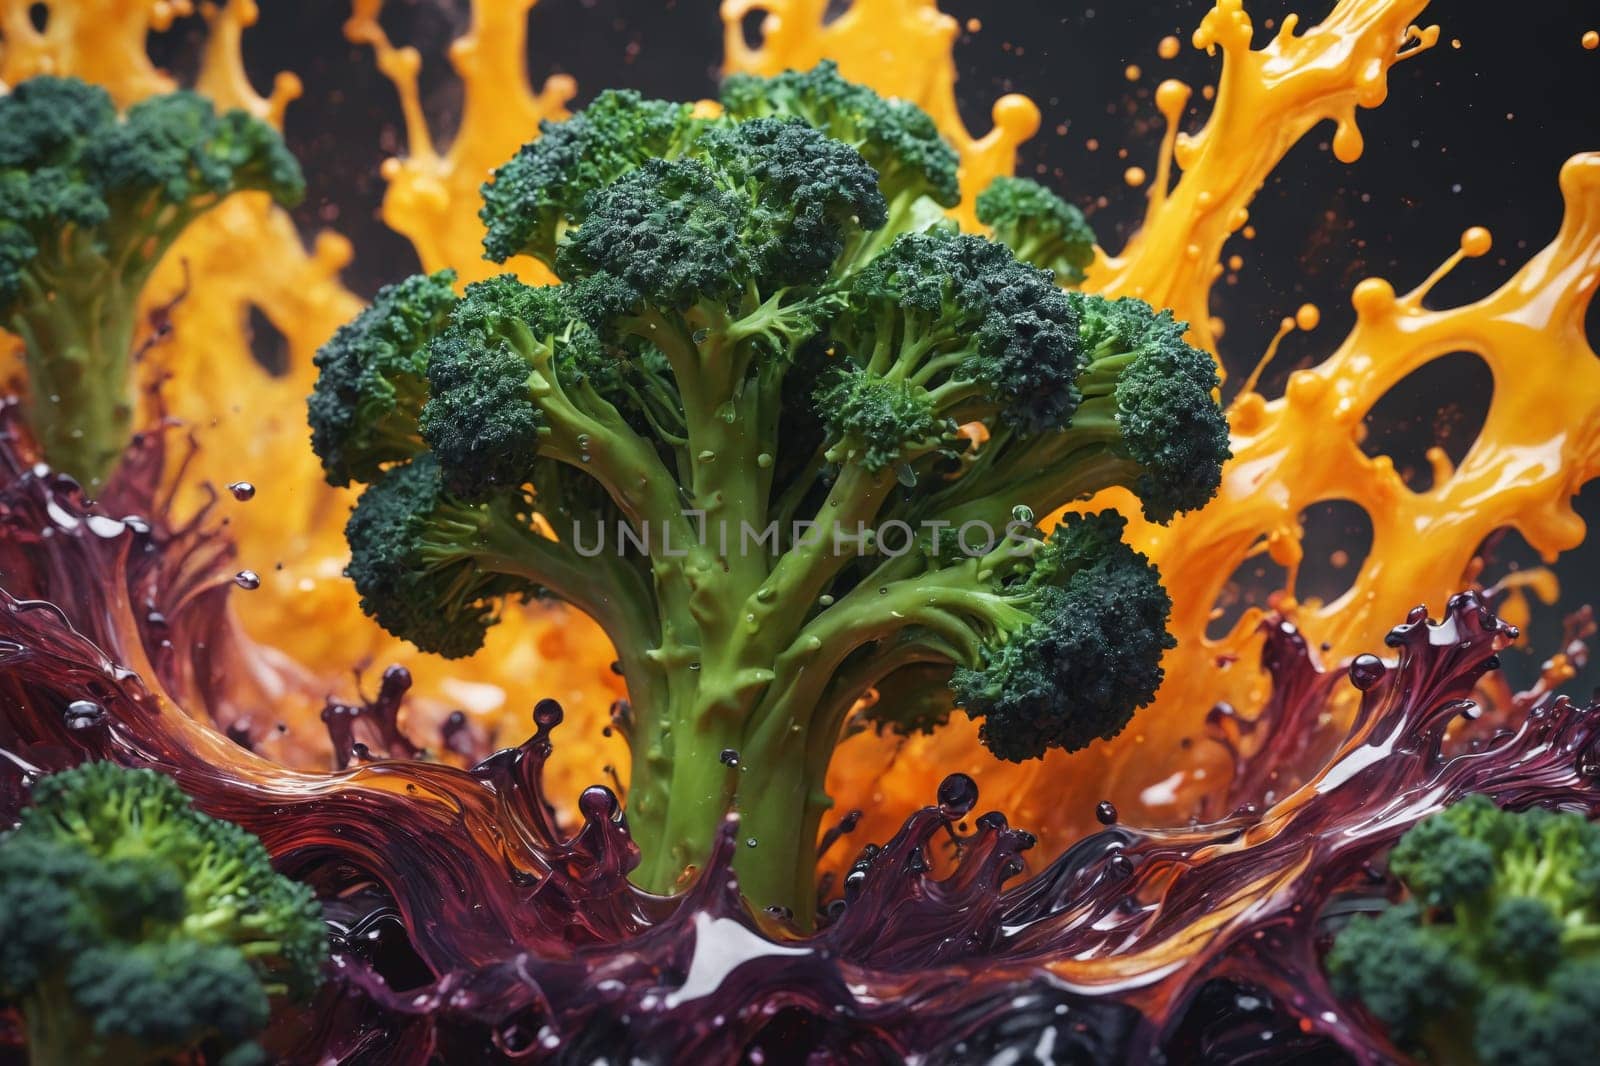 The freshness of broccoli captured with an energetic splash of orange on a vibrant background.